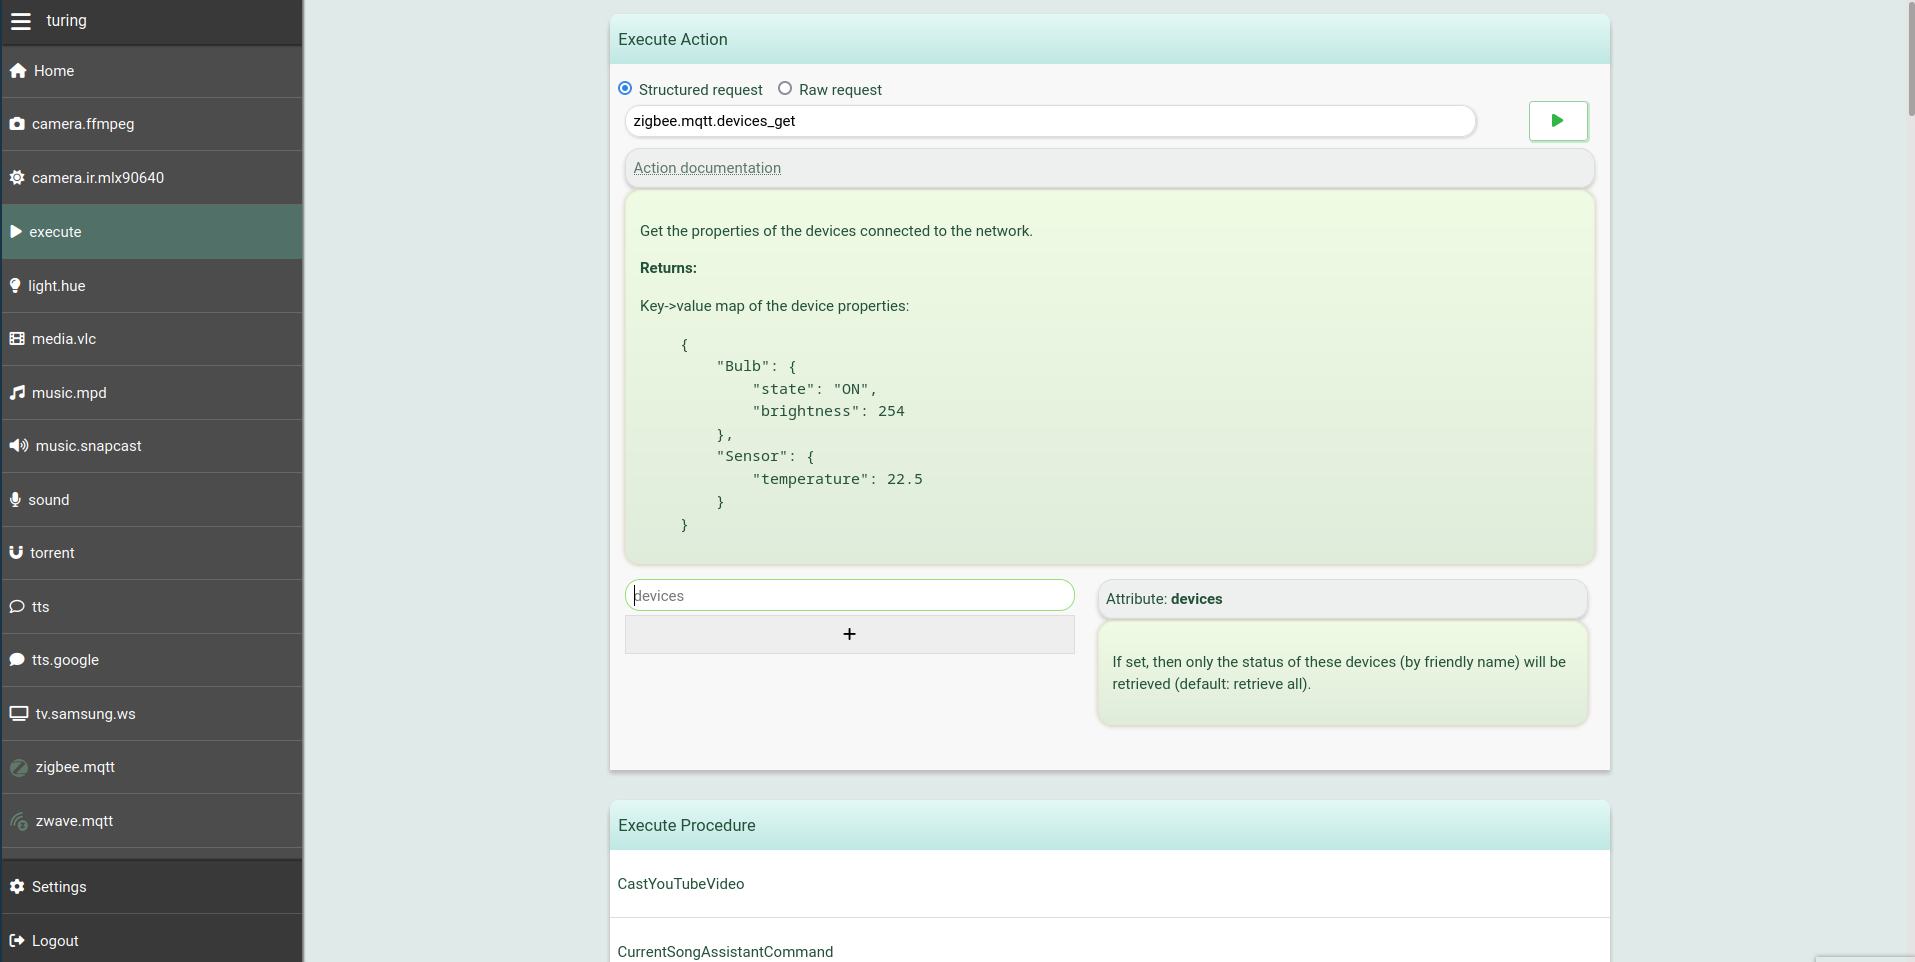 Screenshot of the execution panel, showing an action's automatically generated documentation and its parsed attributes